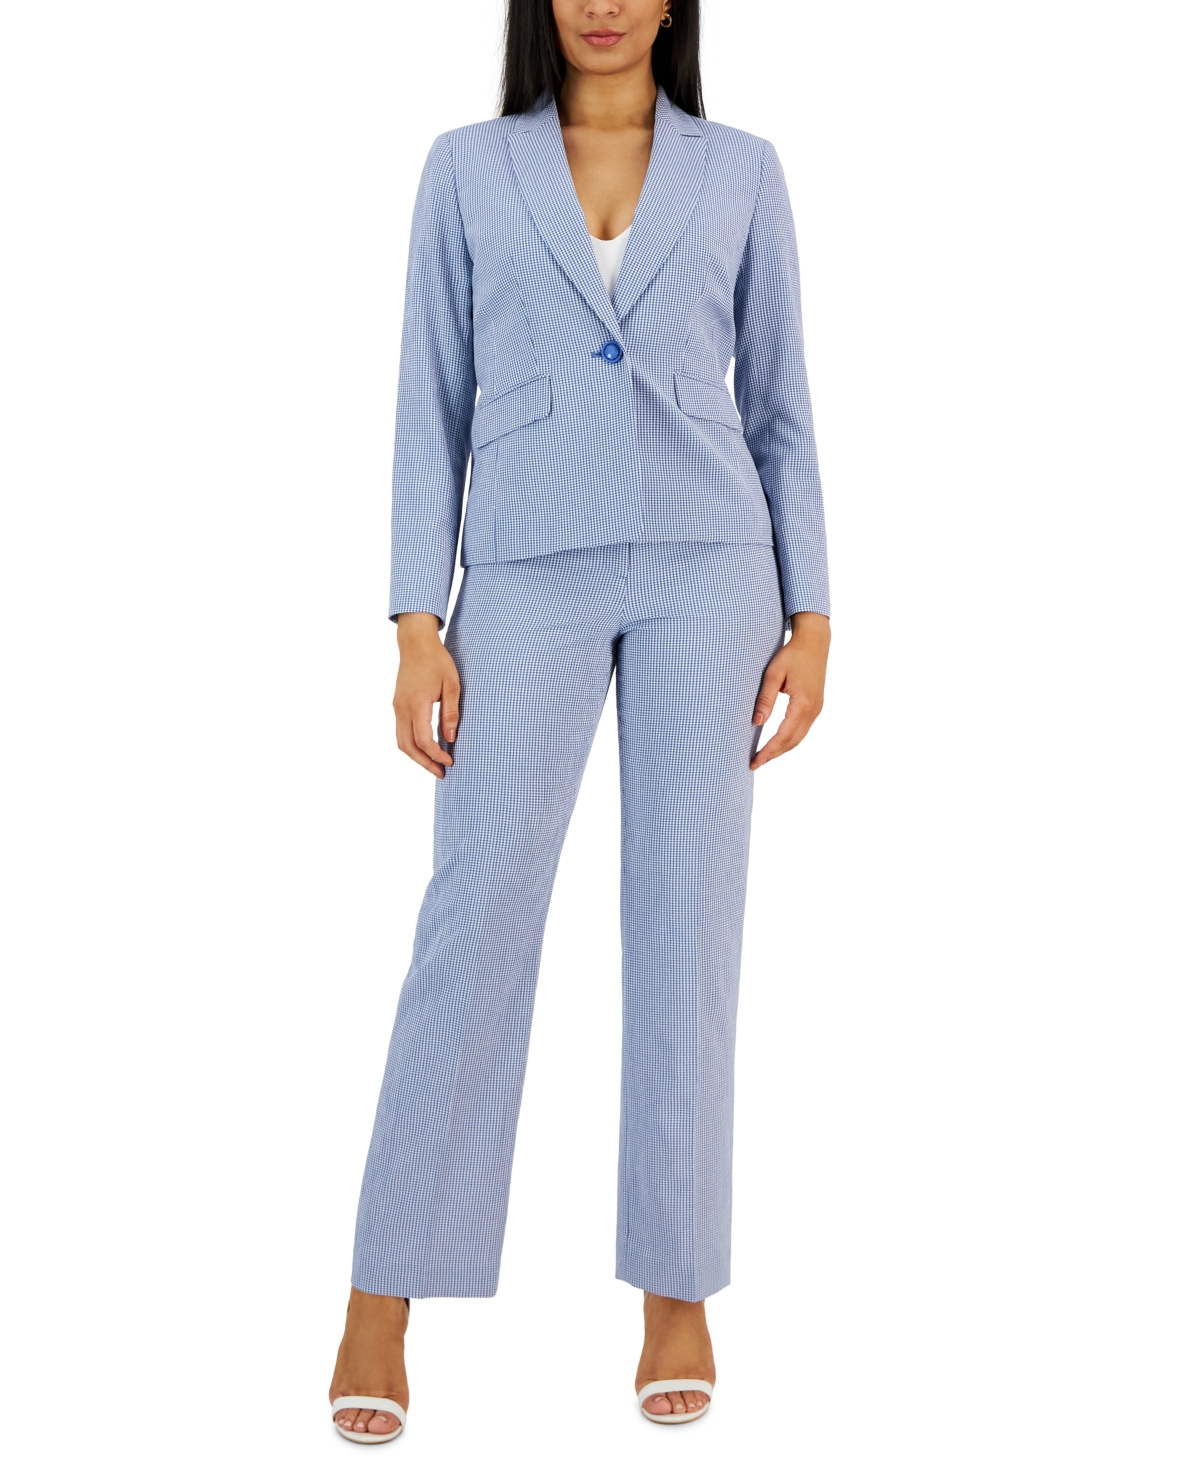 Gingham Single-Button Closure Blazer and Straight Leg Mid-Rise Pantsuit, Regular and Petite Sizes - Chambray/White